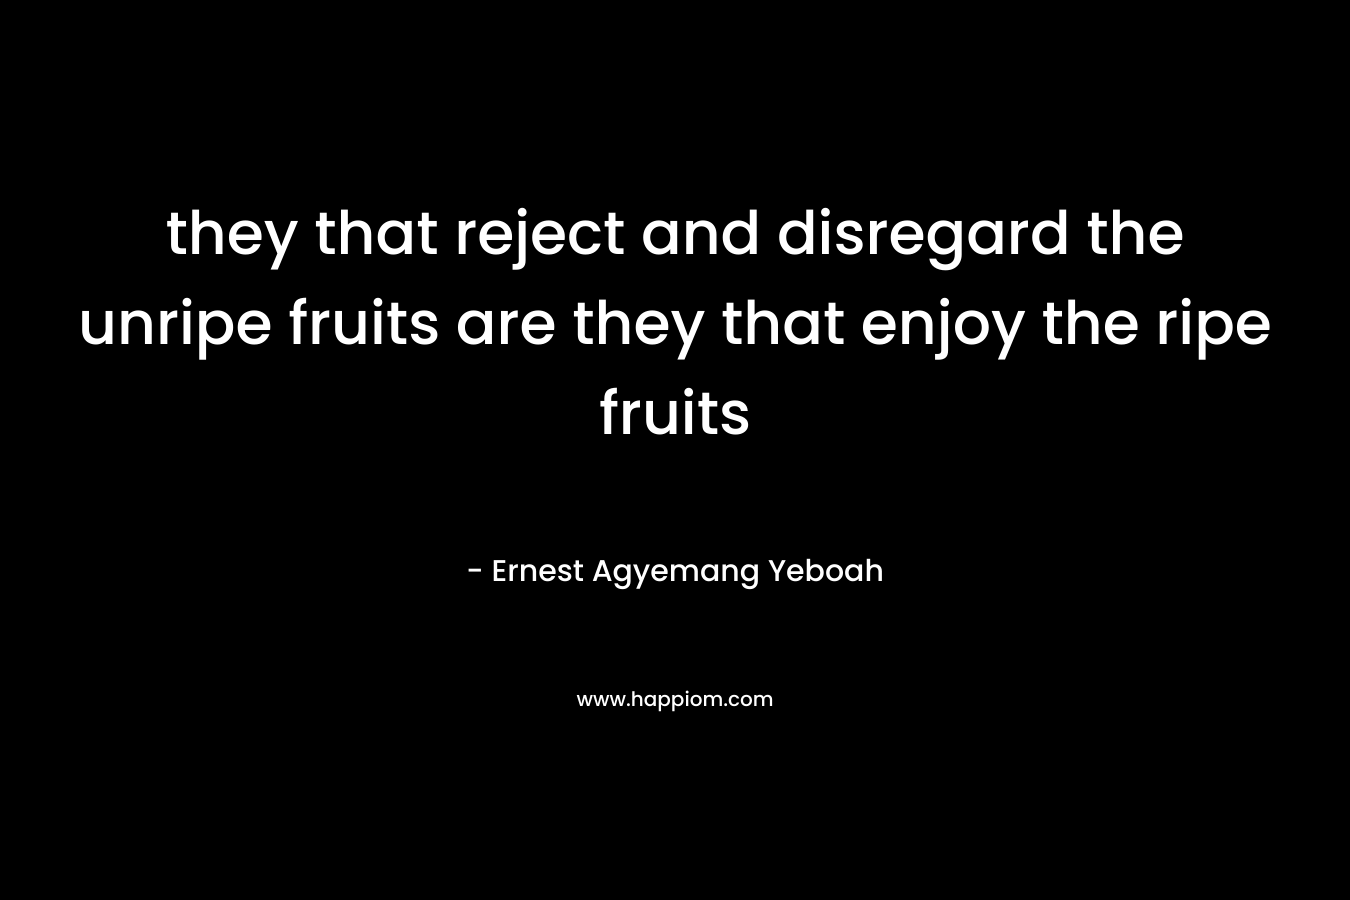 they that reject and disregard the unripe fruits are they that enjoy the ripe fruits – Ernest Agyemang Yeboah